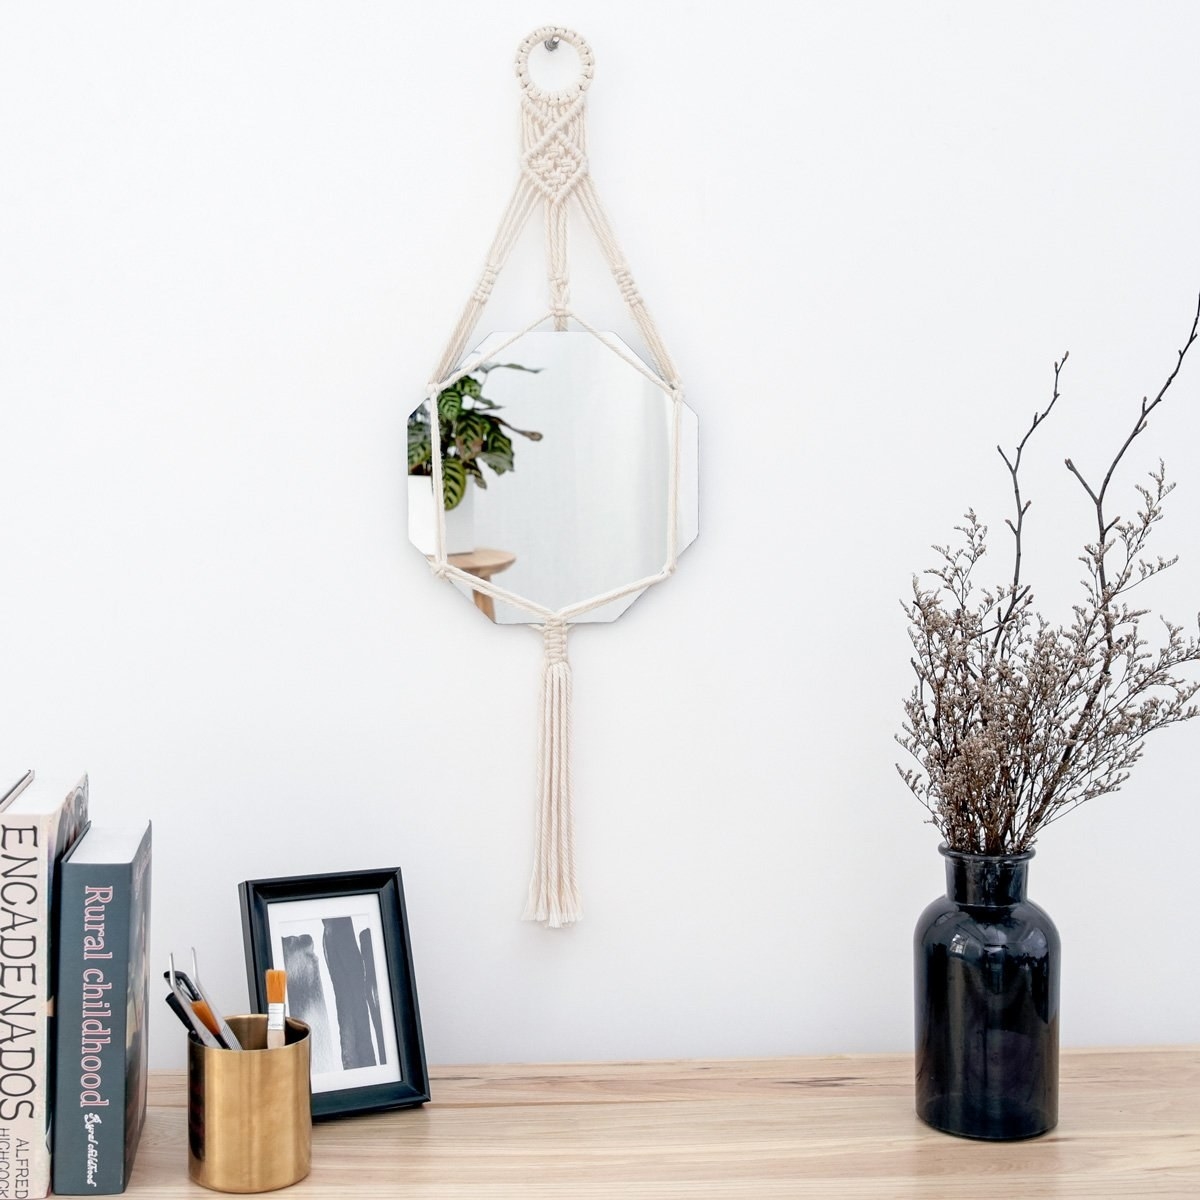 The macrame wall mirror hanging on a wall.